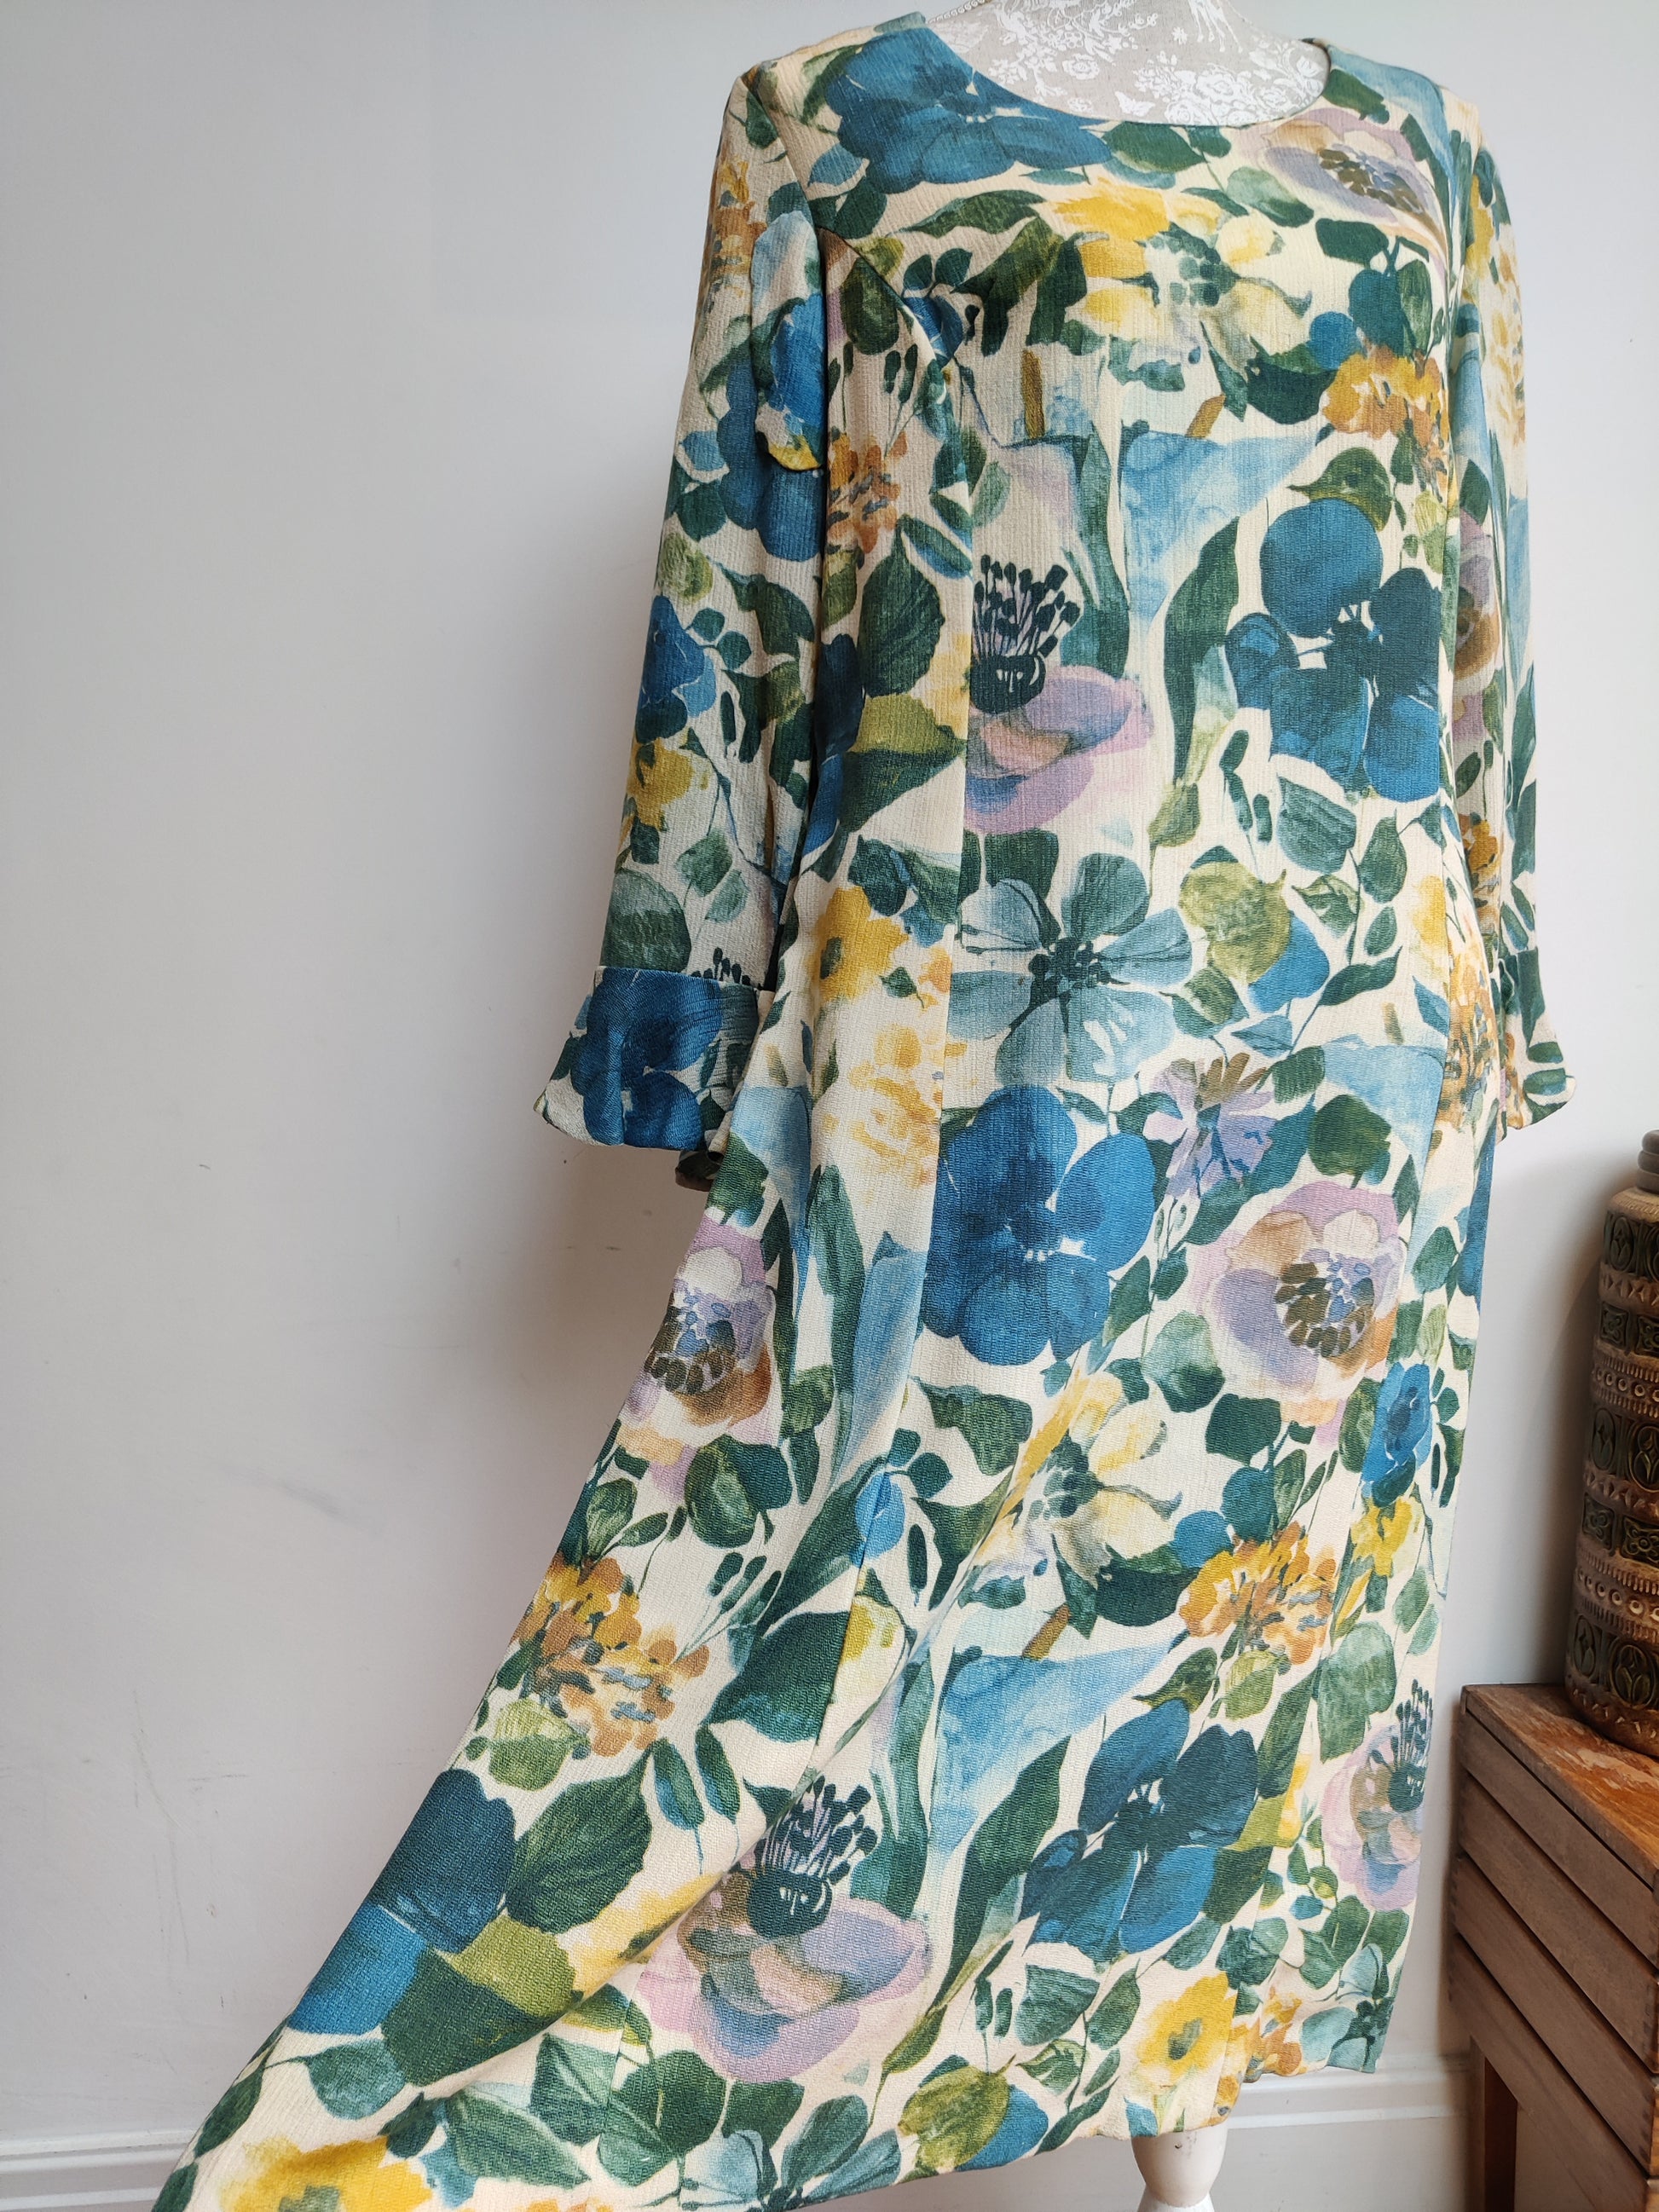 50s floral dress with long flared sleeves.